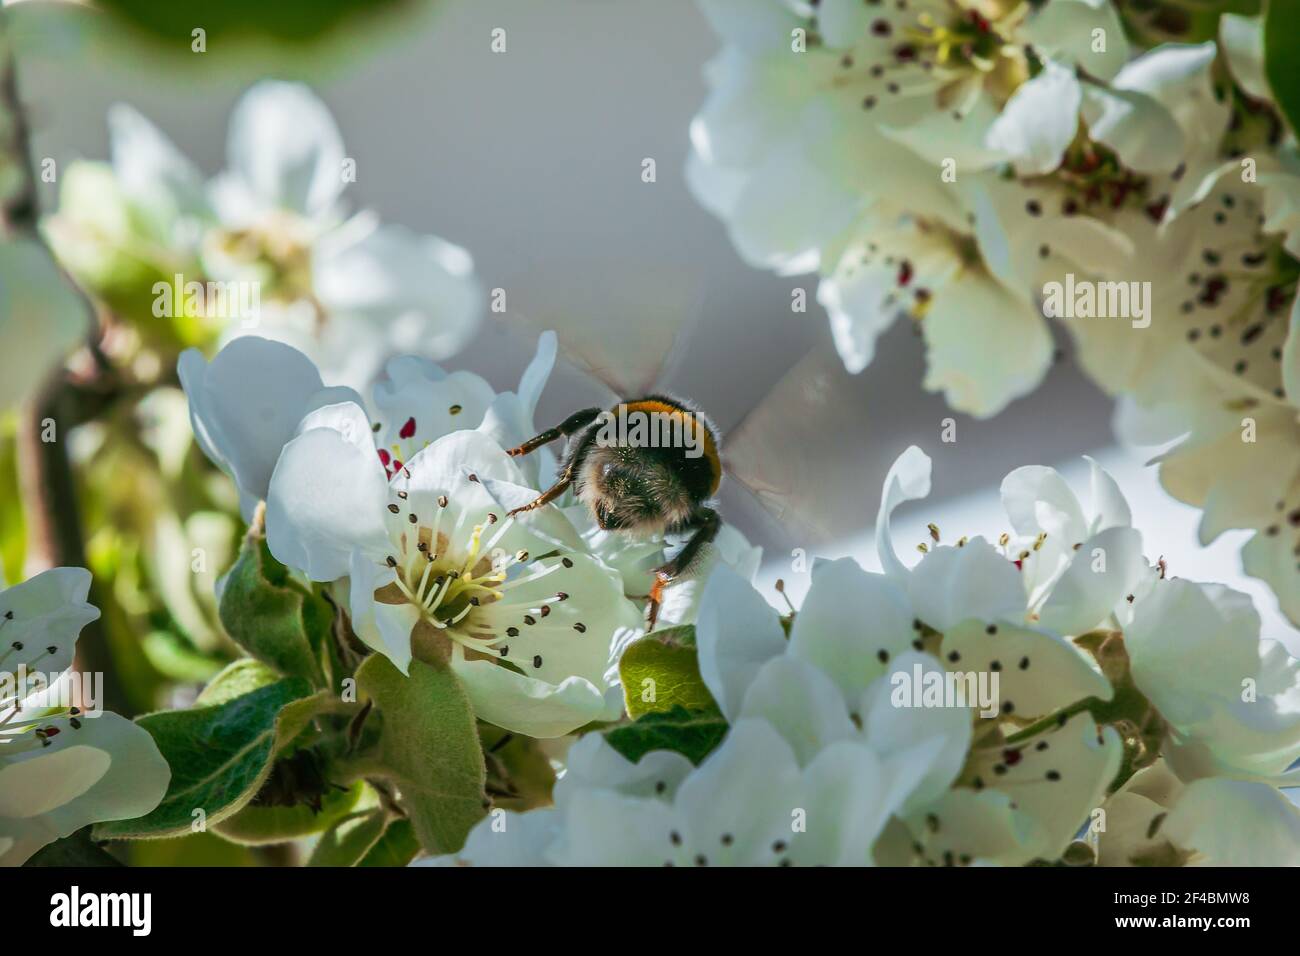 Branch with many apple blossoms in spring. Bumblebee insect back on a blossom of the fruit tree in sunshine. White flowers when open with reddish pist Stock Photo